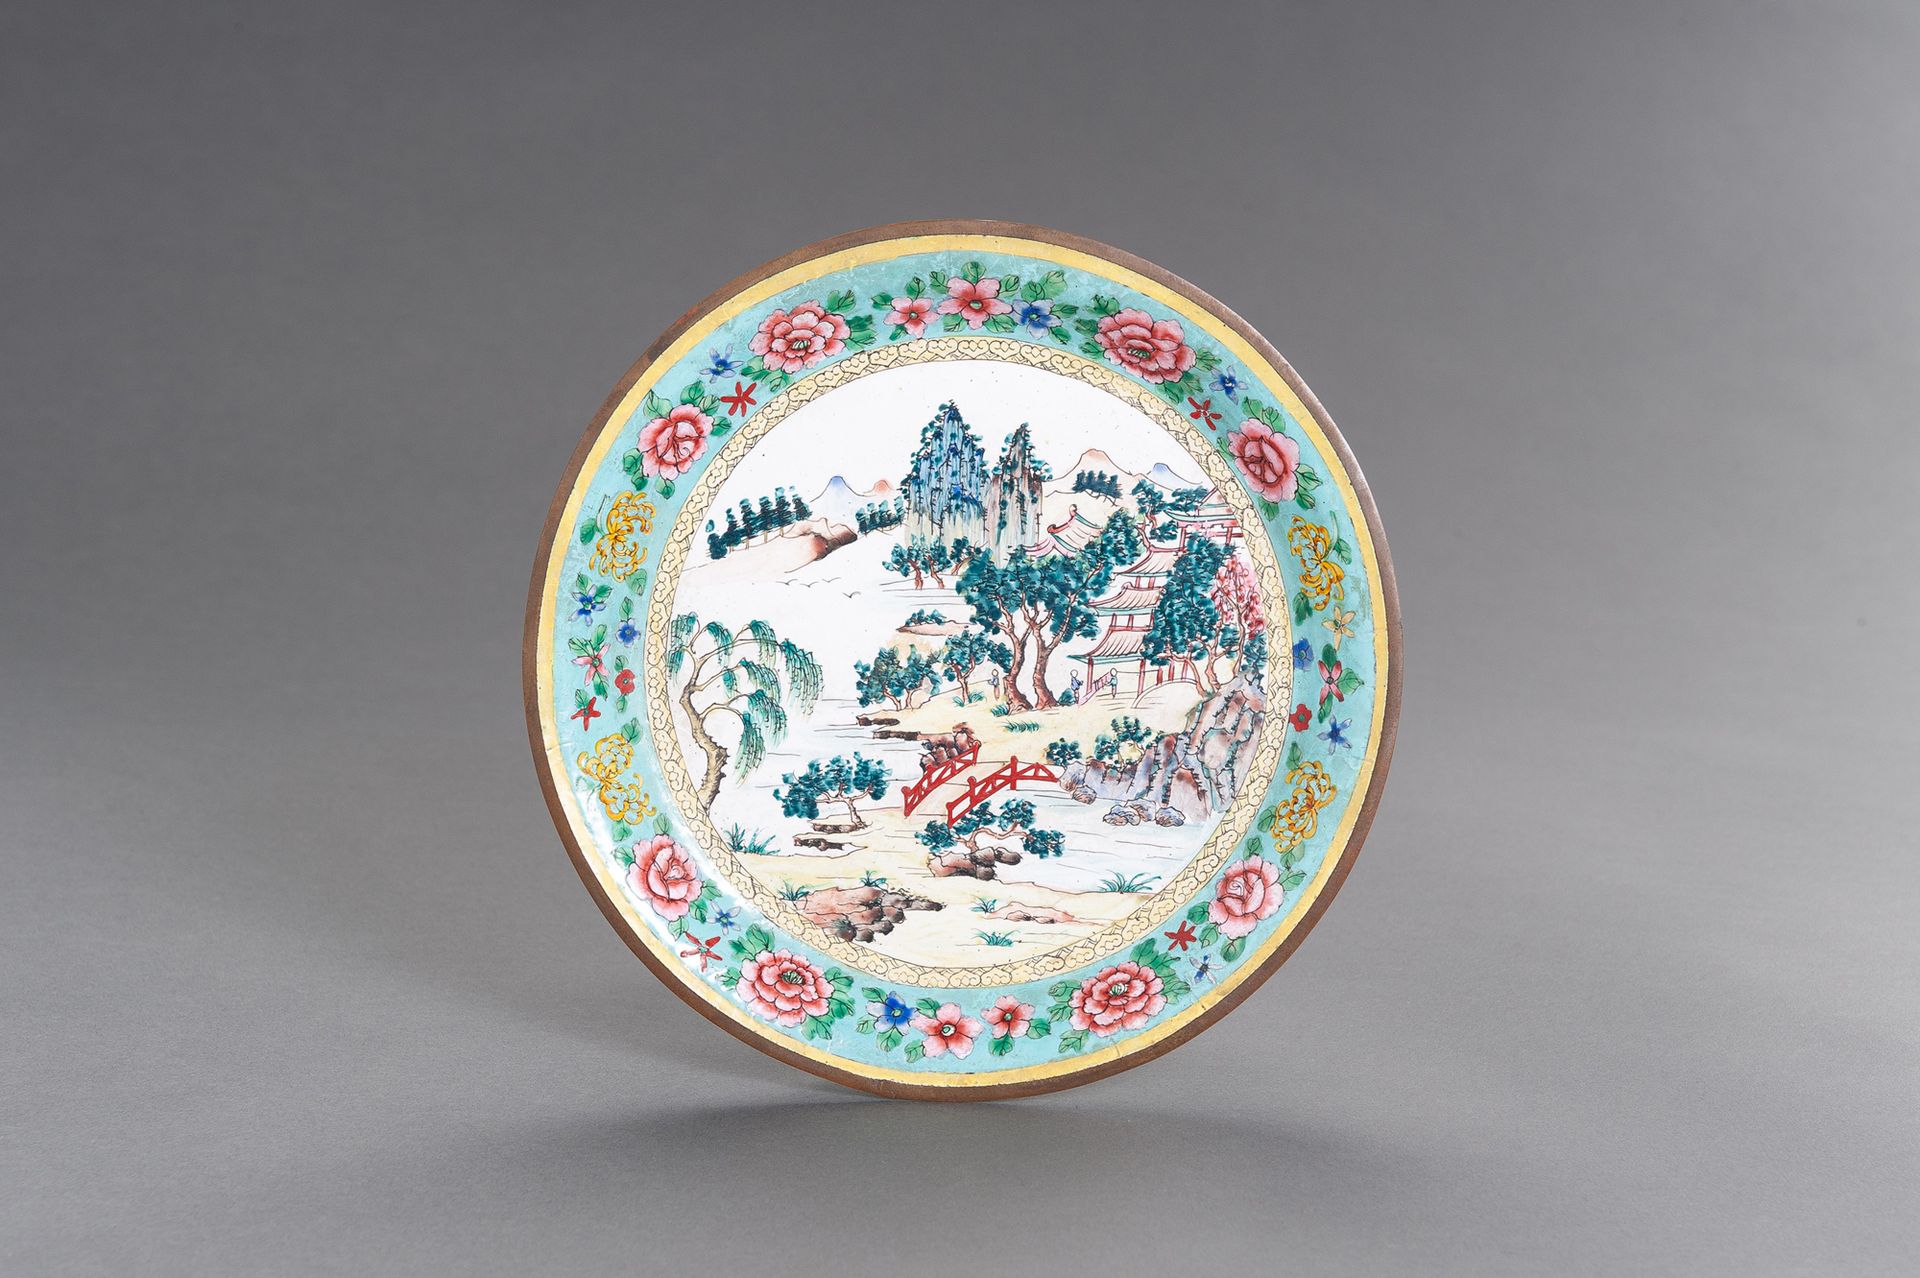 A CANTON ENAMEL ‘LANDSCAPE’ DISH, LATE QING TO REPUBLIC A CANTON ENAMEL ‘LANDSCA&hellip;